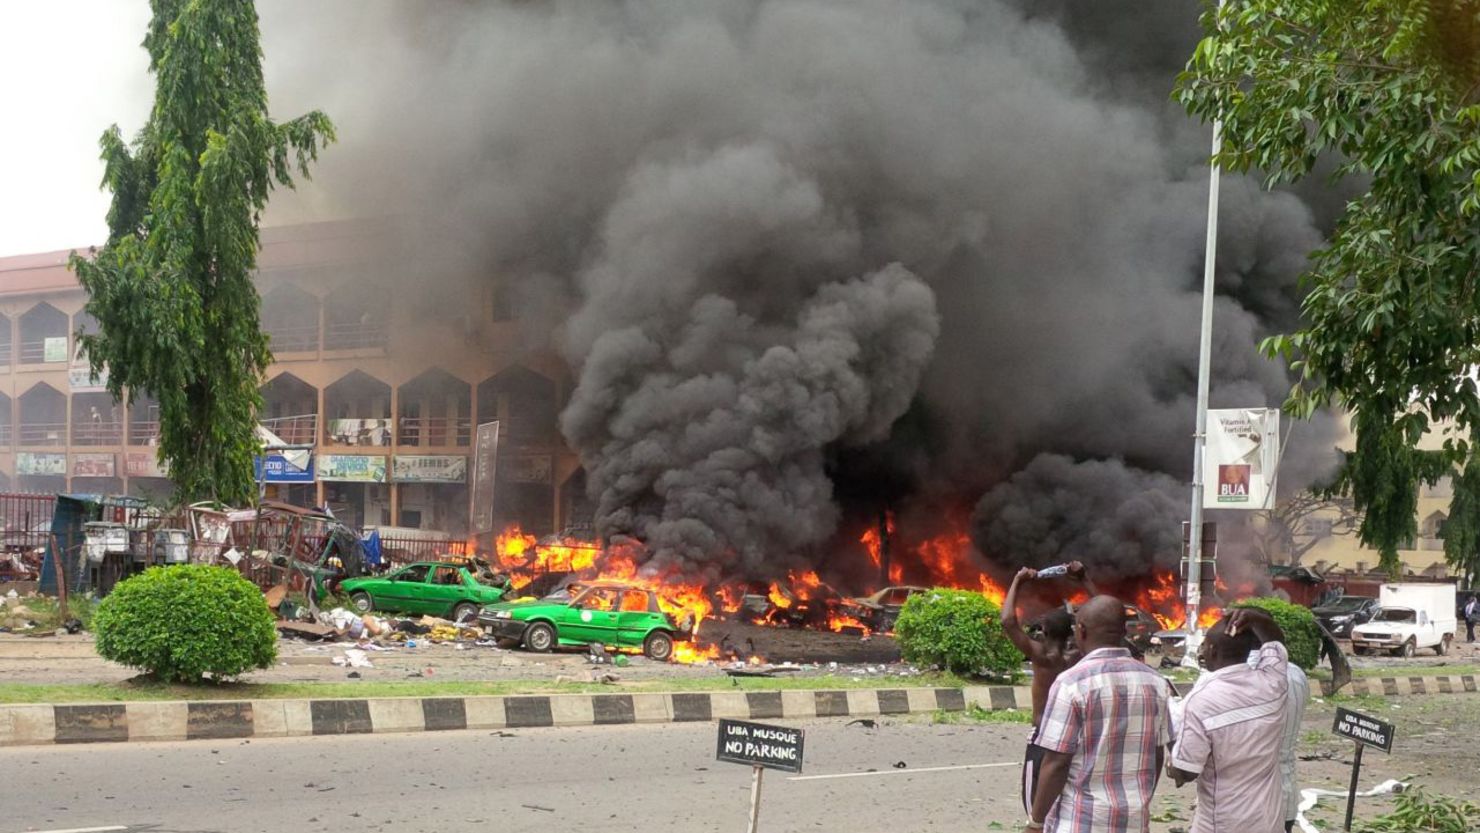 The blast happened at Emab Plaza in Abuja's Wuse II business district around 4 p.m. local time.